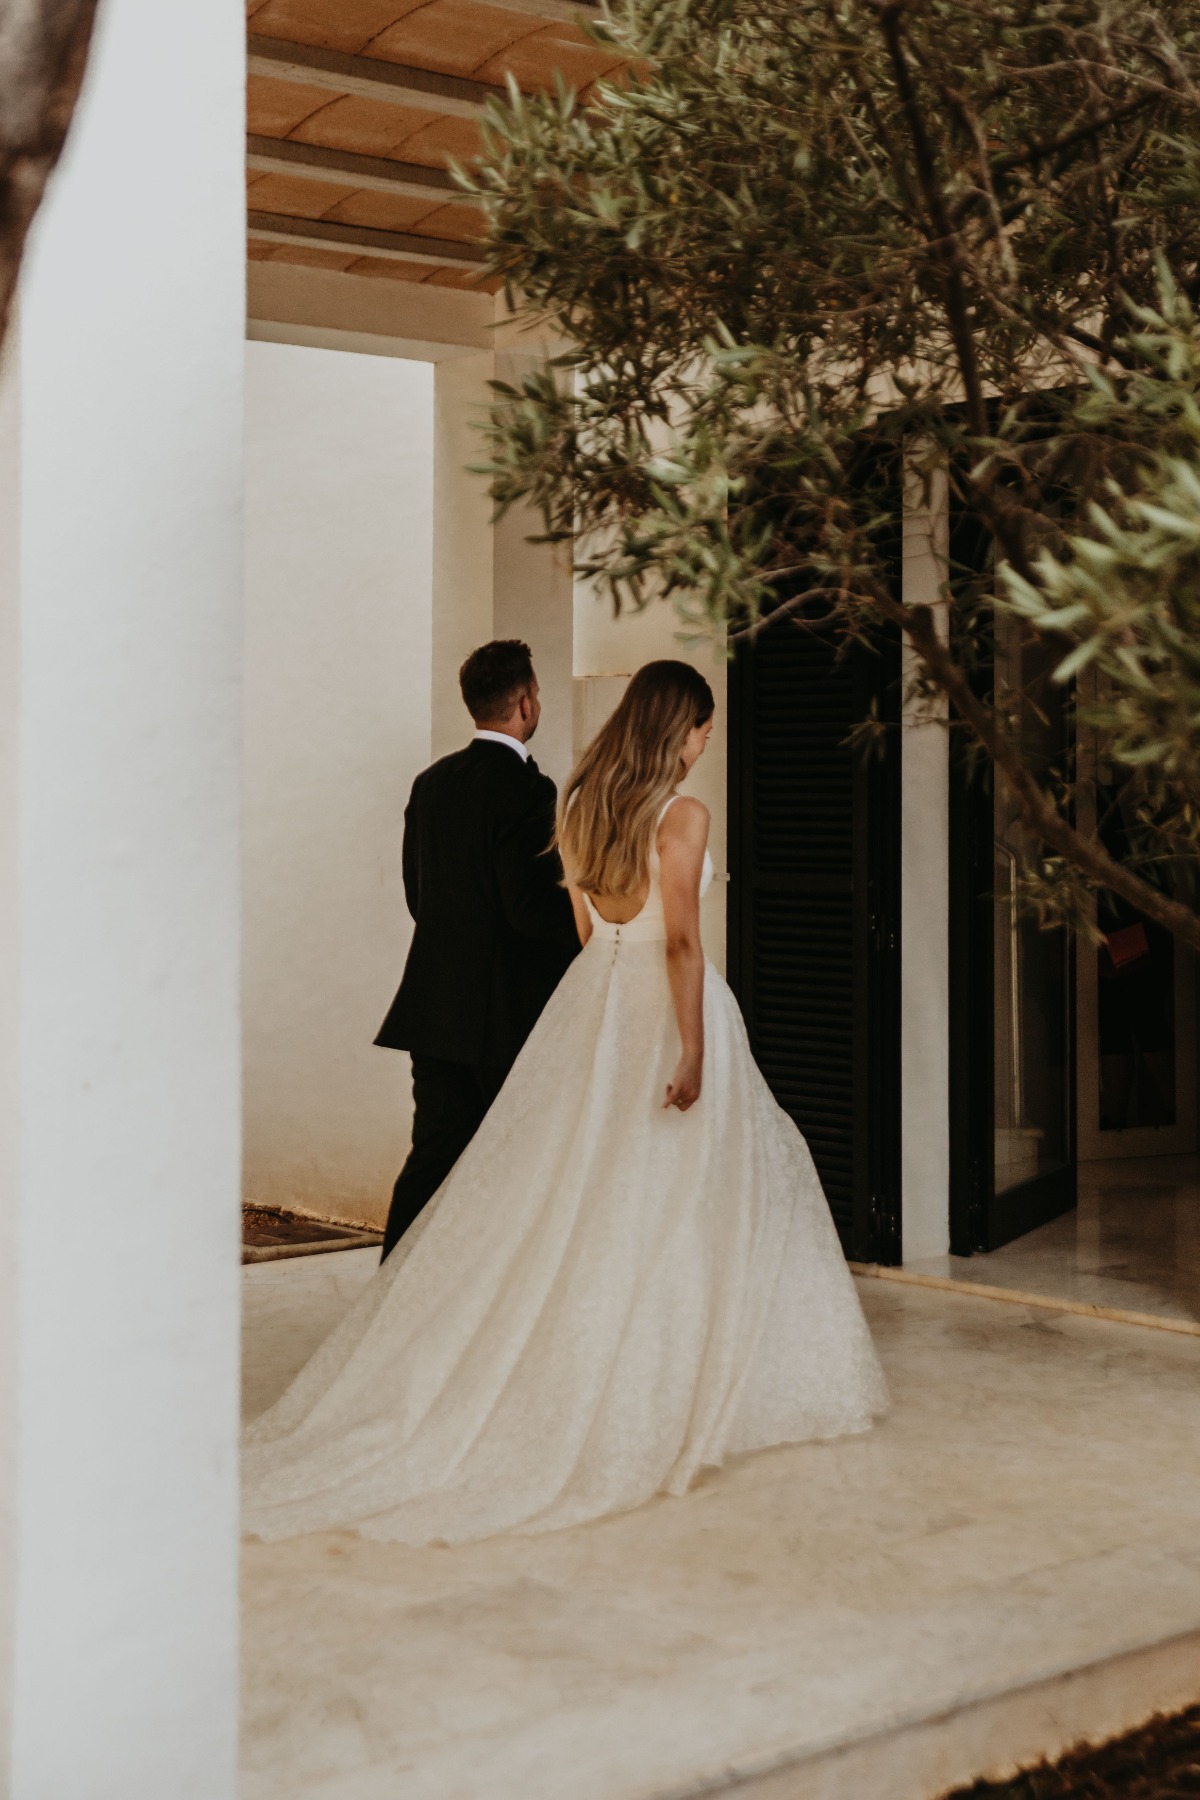 English Countryside Meets Clean And Contemporary In This Destination Wedding In Ibiza